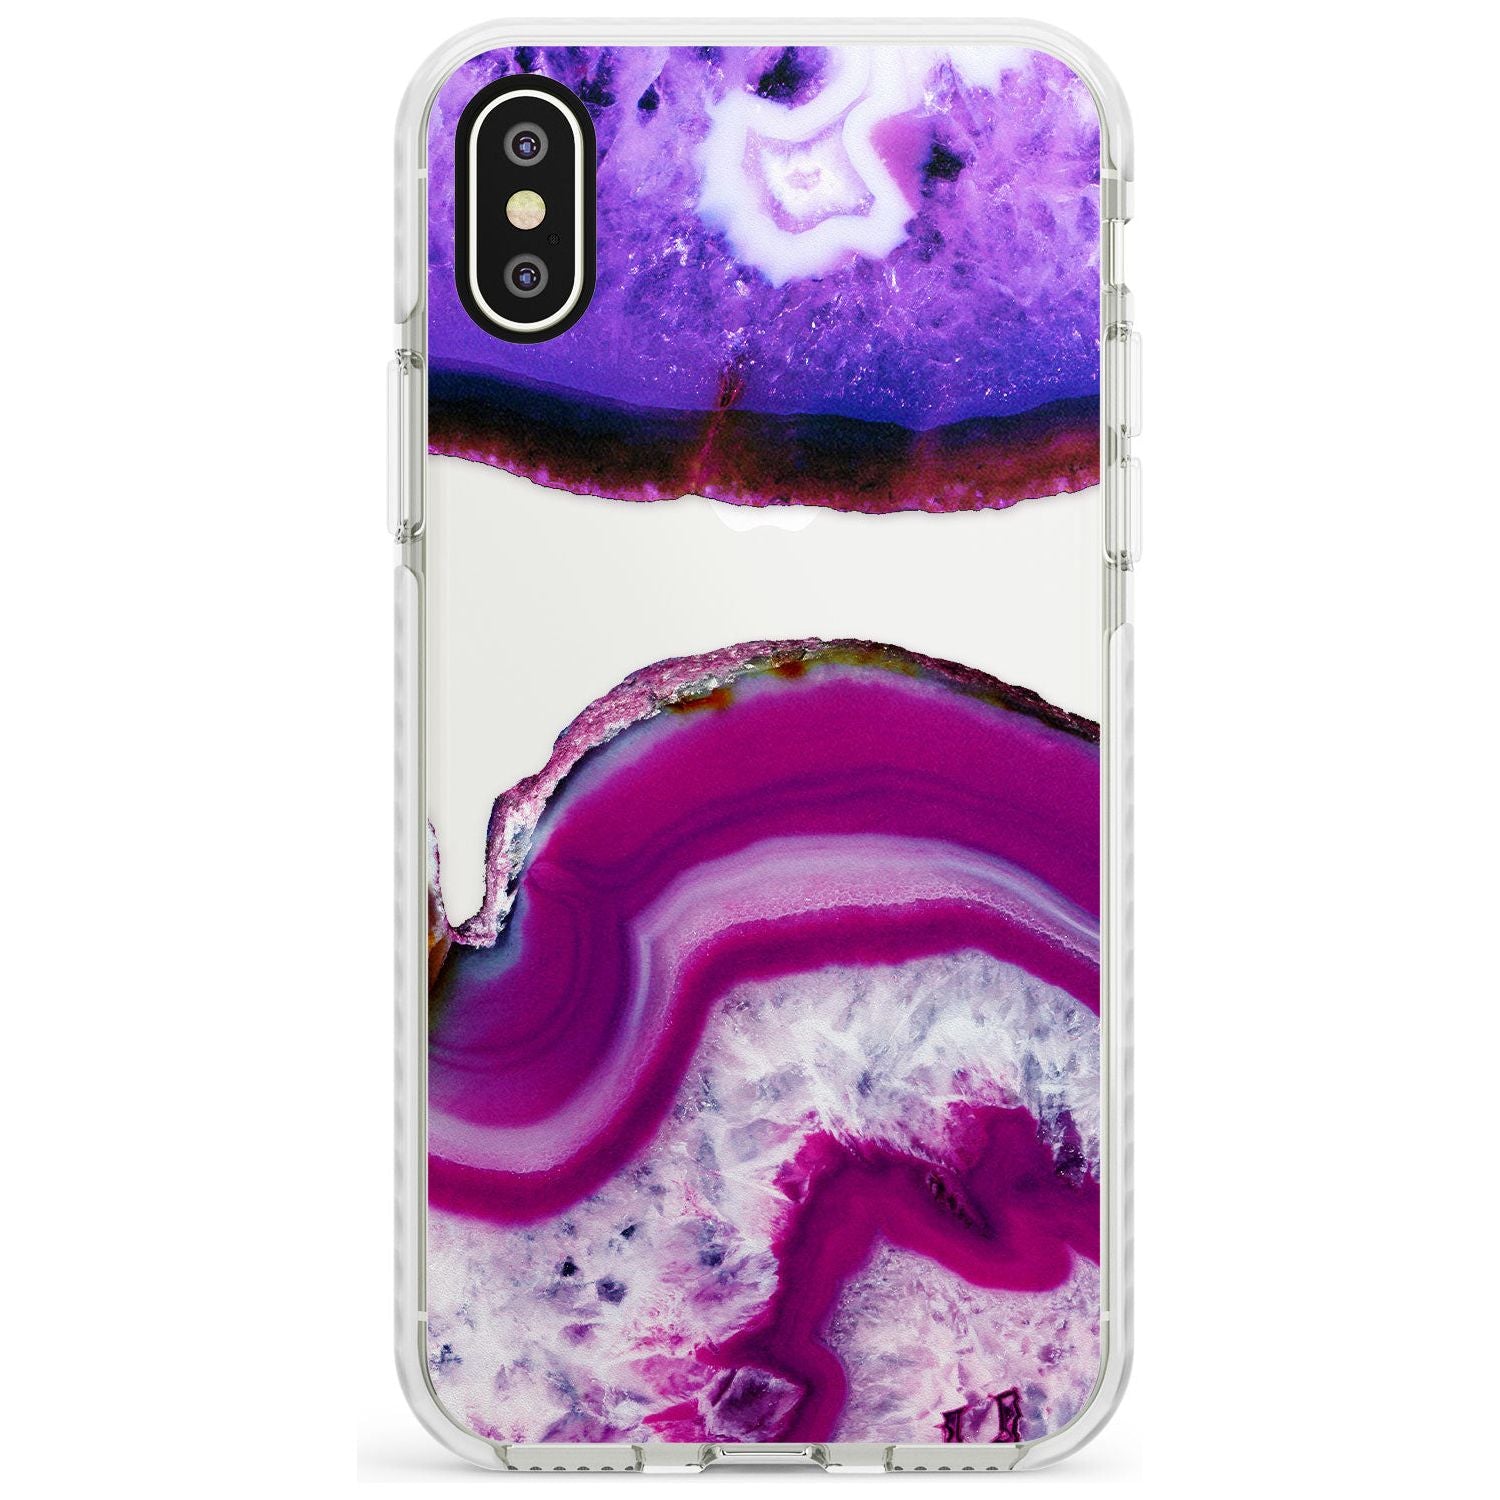 Purple & White Gemstone Crystal Clear Design Impact Phone Case for iPhone X XS Max XR